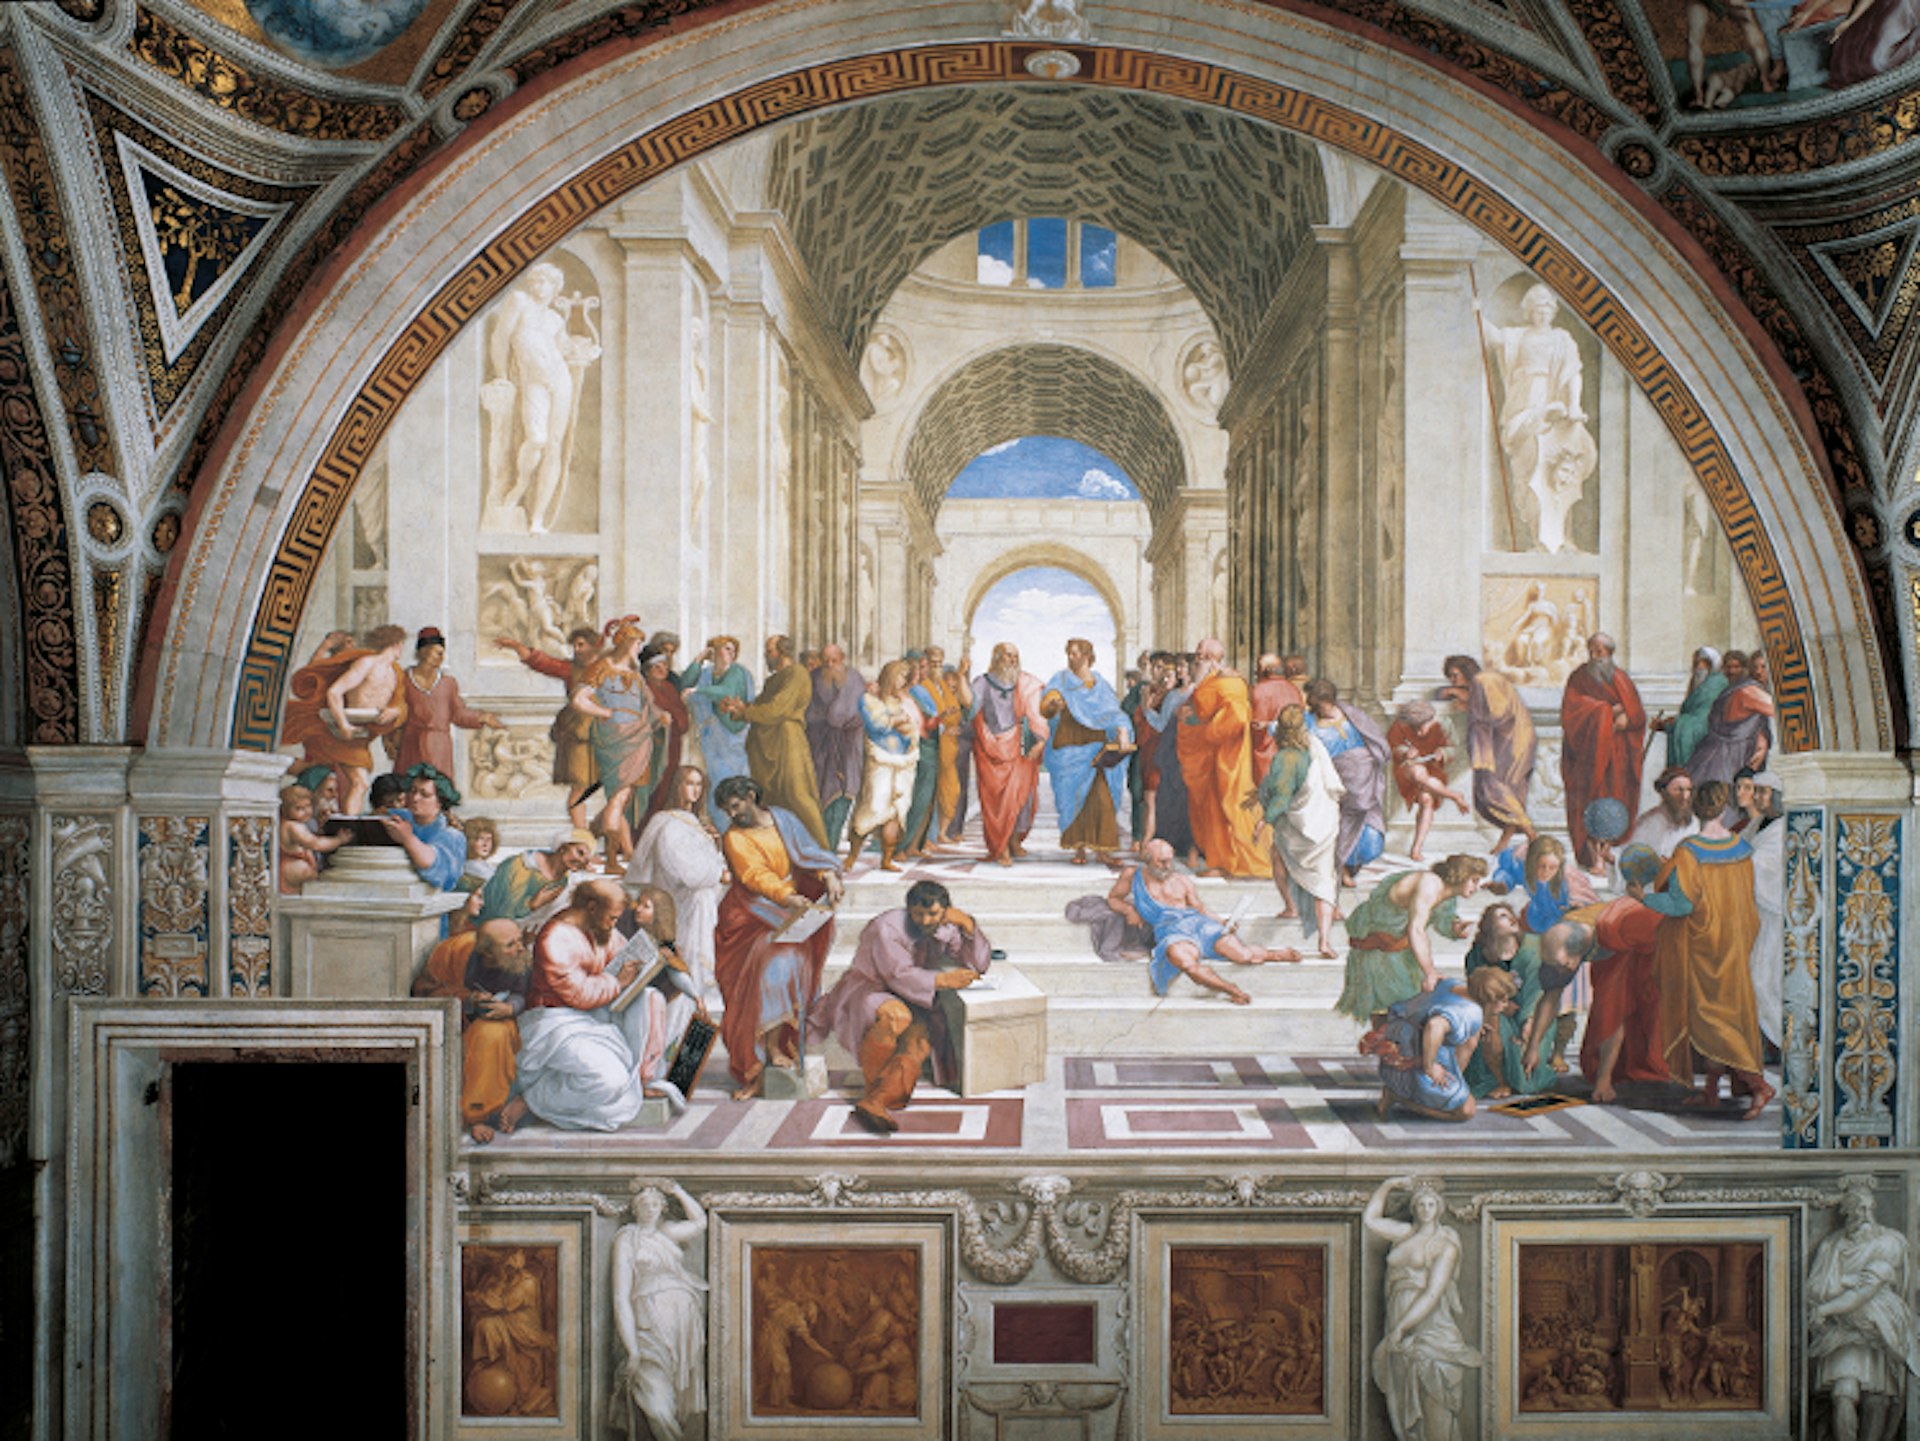 Raphael's great masterpiece, The School of Athens, in the Vatican Museums.